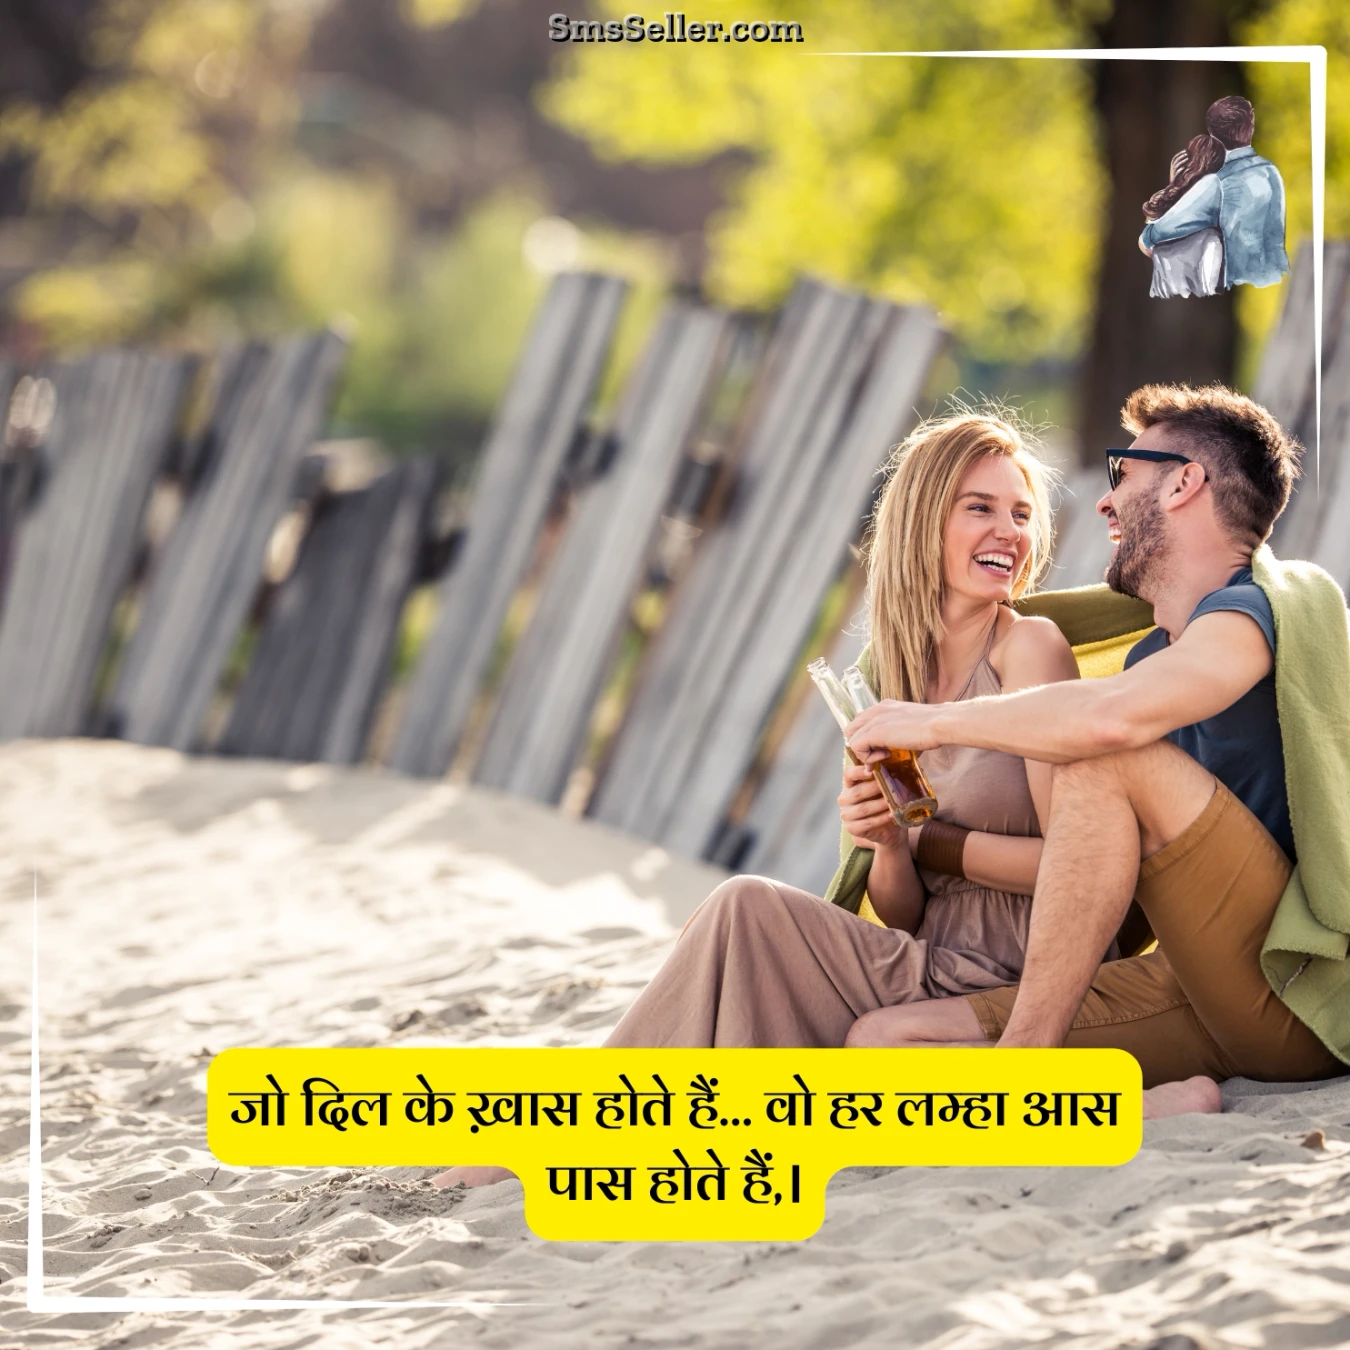 cute funny love quotes dil khaas baatein